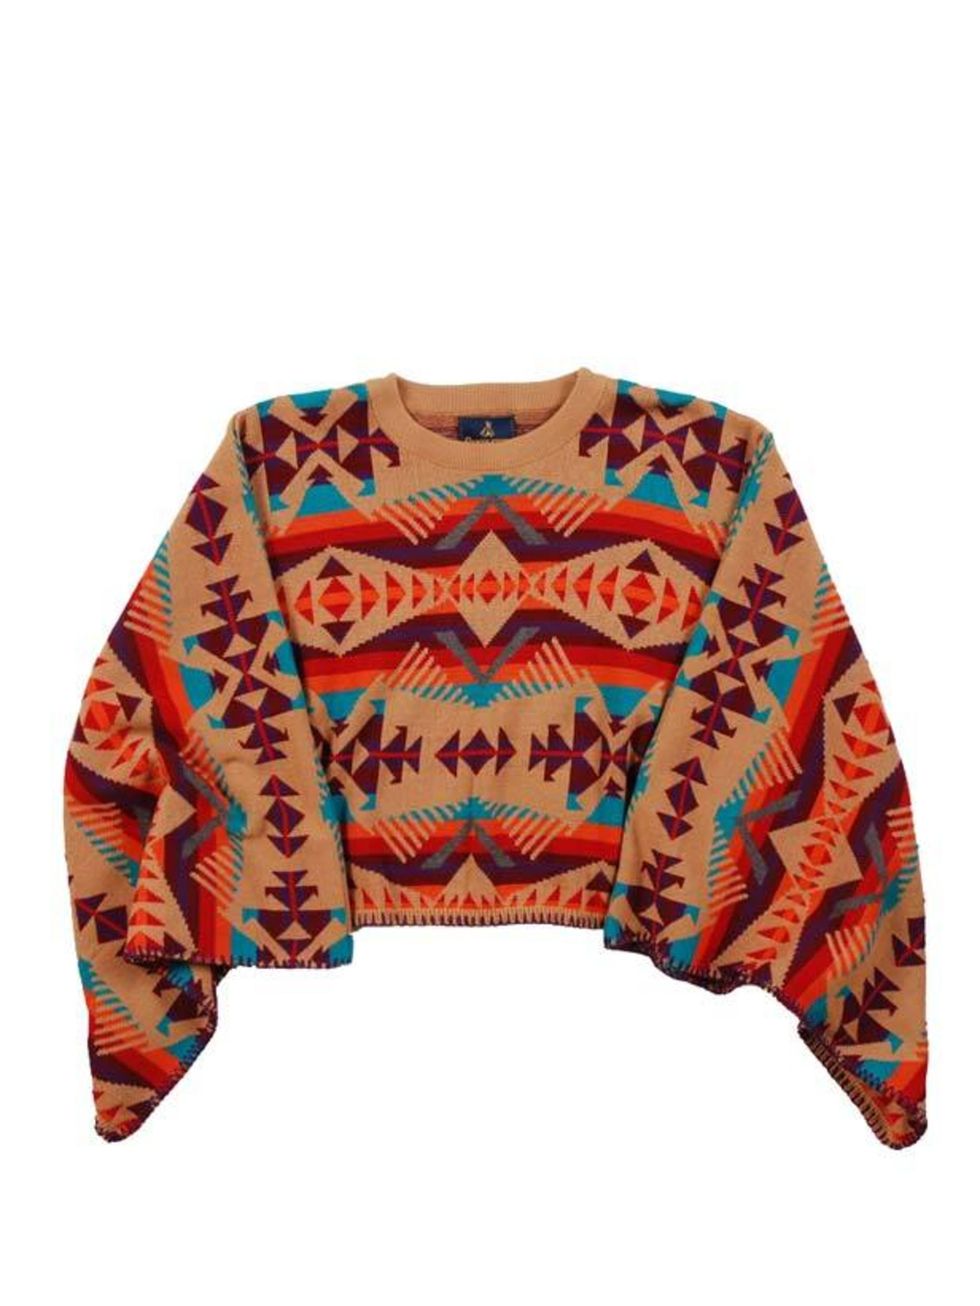 <p>Pendleton meets Opening Ceremony aztec poncho, £216, at <a href="http://goodhoodstore.com/?page=51&amp;id=1998&amp;type=womens">Goodhood</a></p>